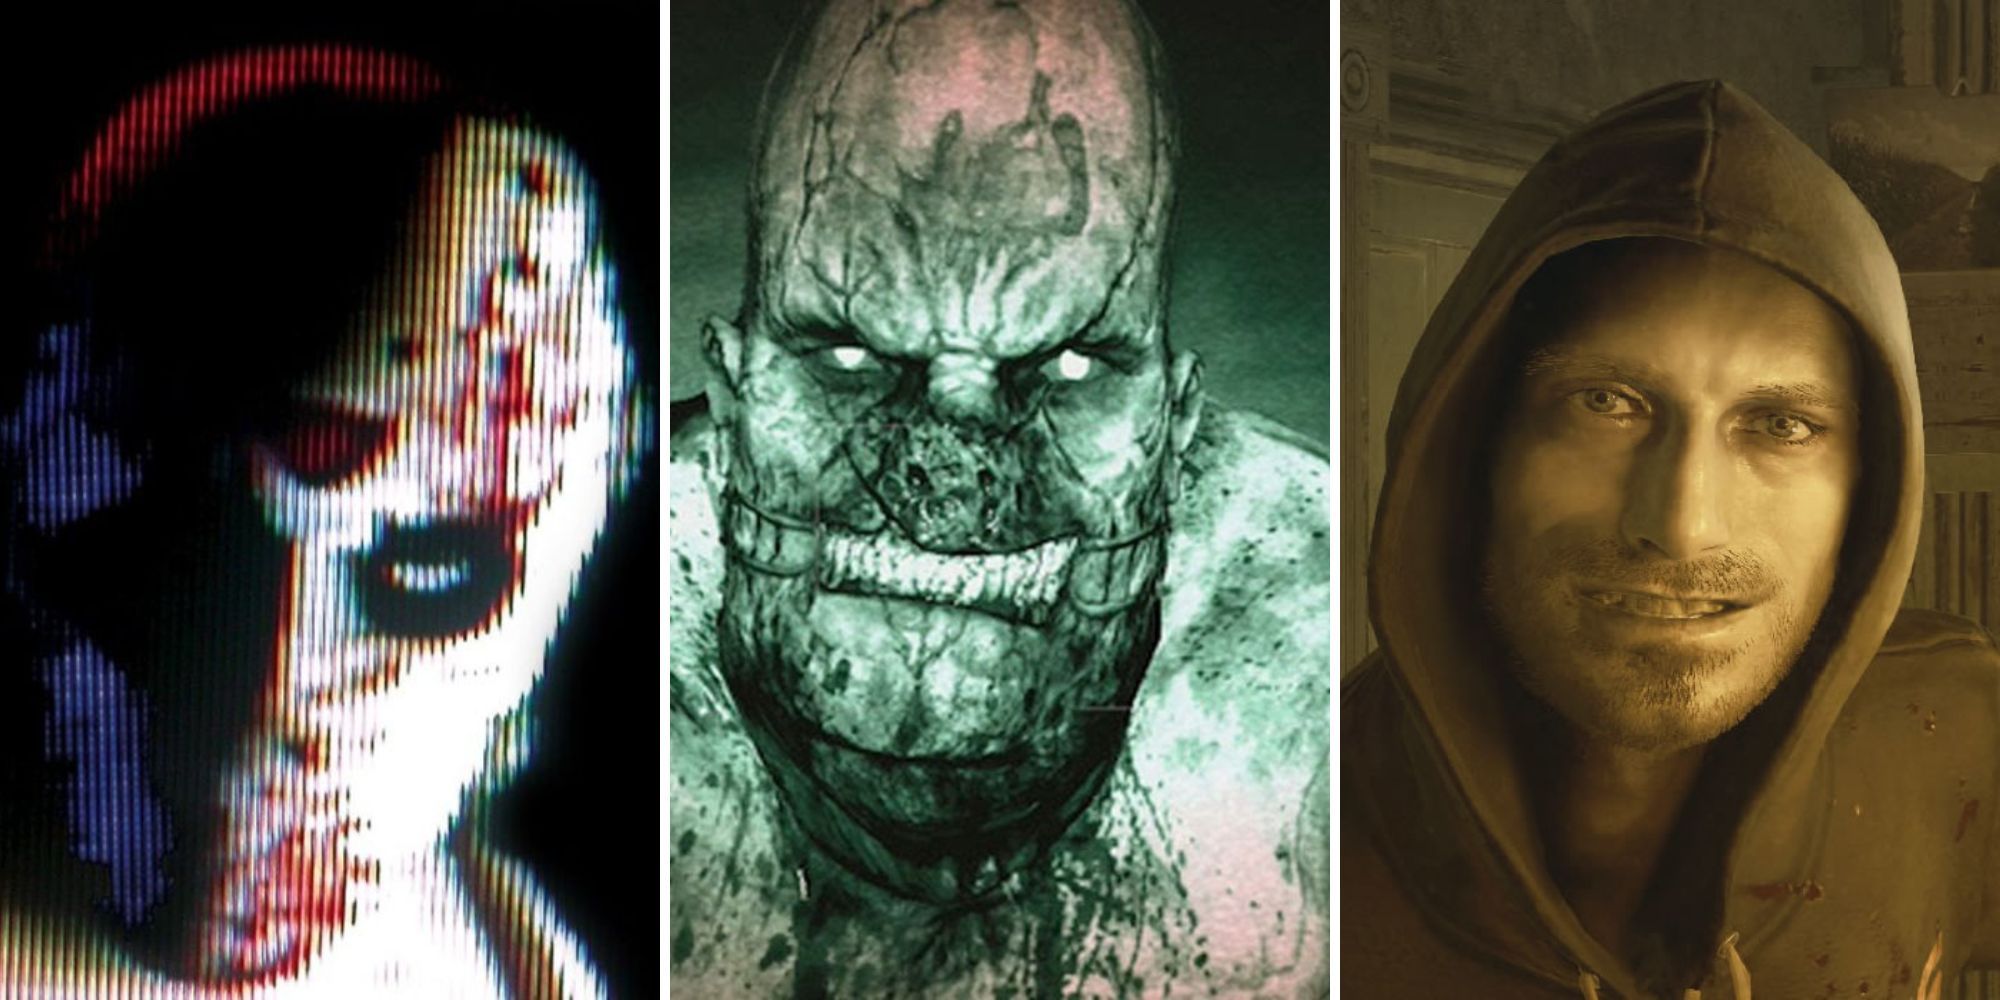 A grid of images showing three different humans that could be classed as monsters in the horror games Manhunt, Outlast, and Resident Evil 7: Biohazard